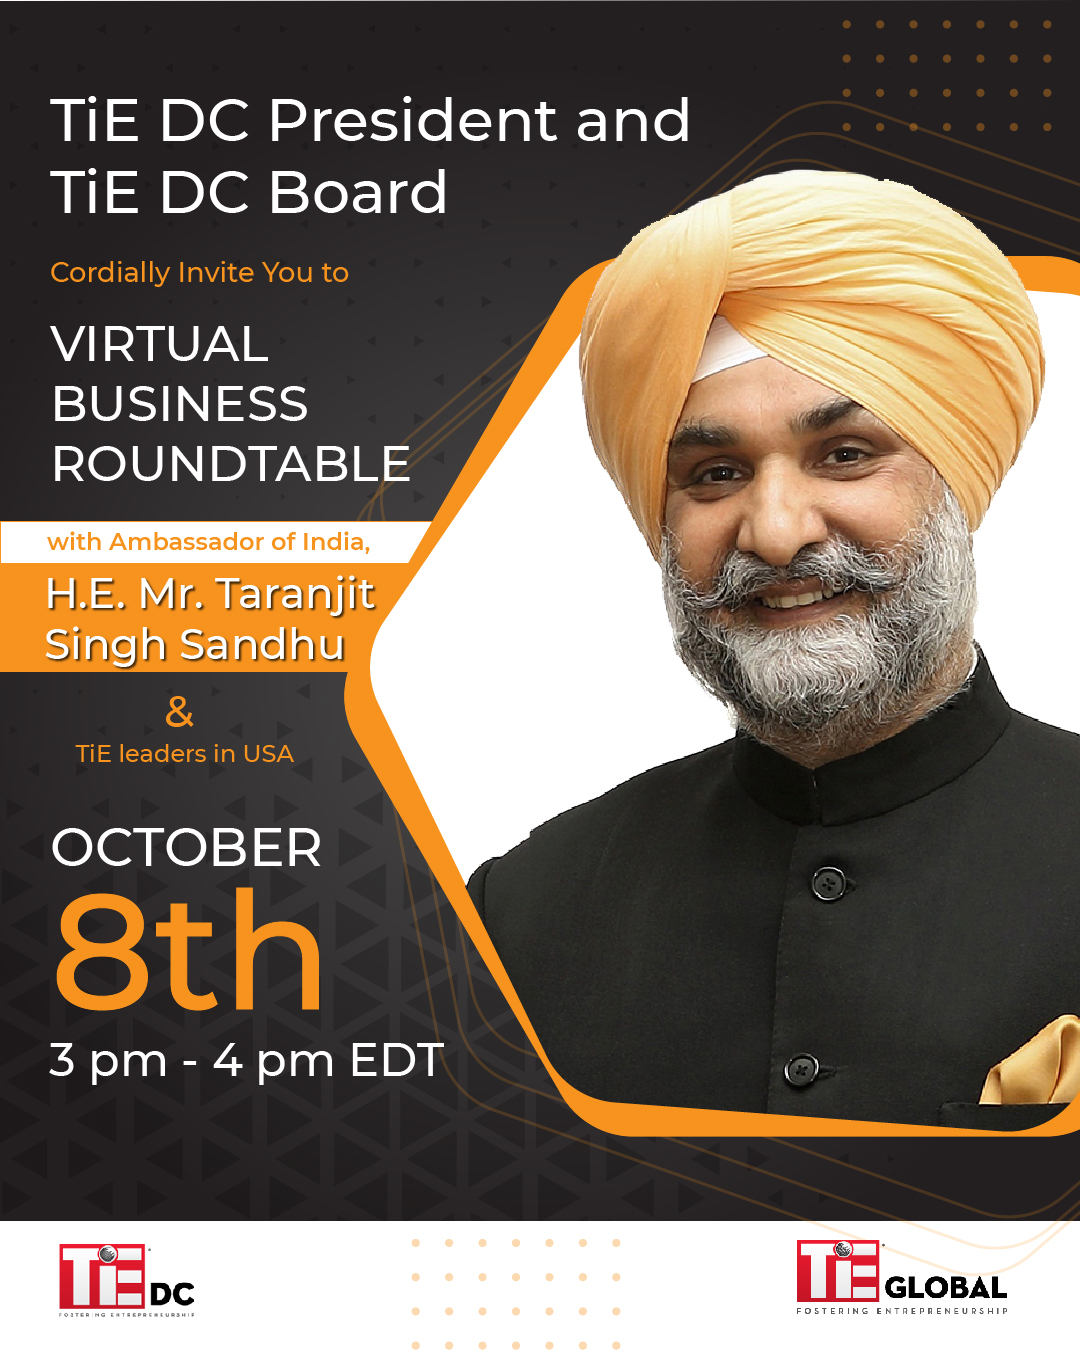 An invite to the Virtual Business Roundtable with Indian Ambassador to USA, H.E. Mr. Taranjit Singh Sandhu.